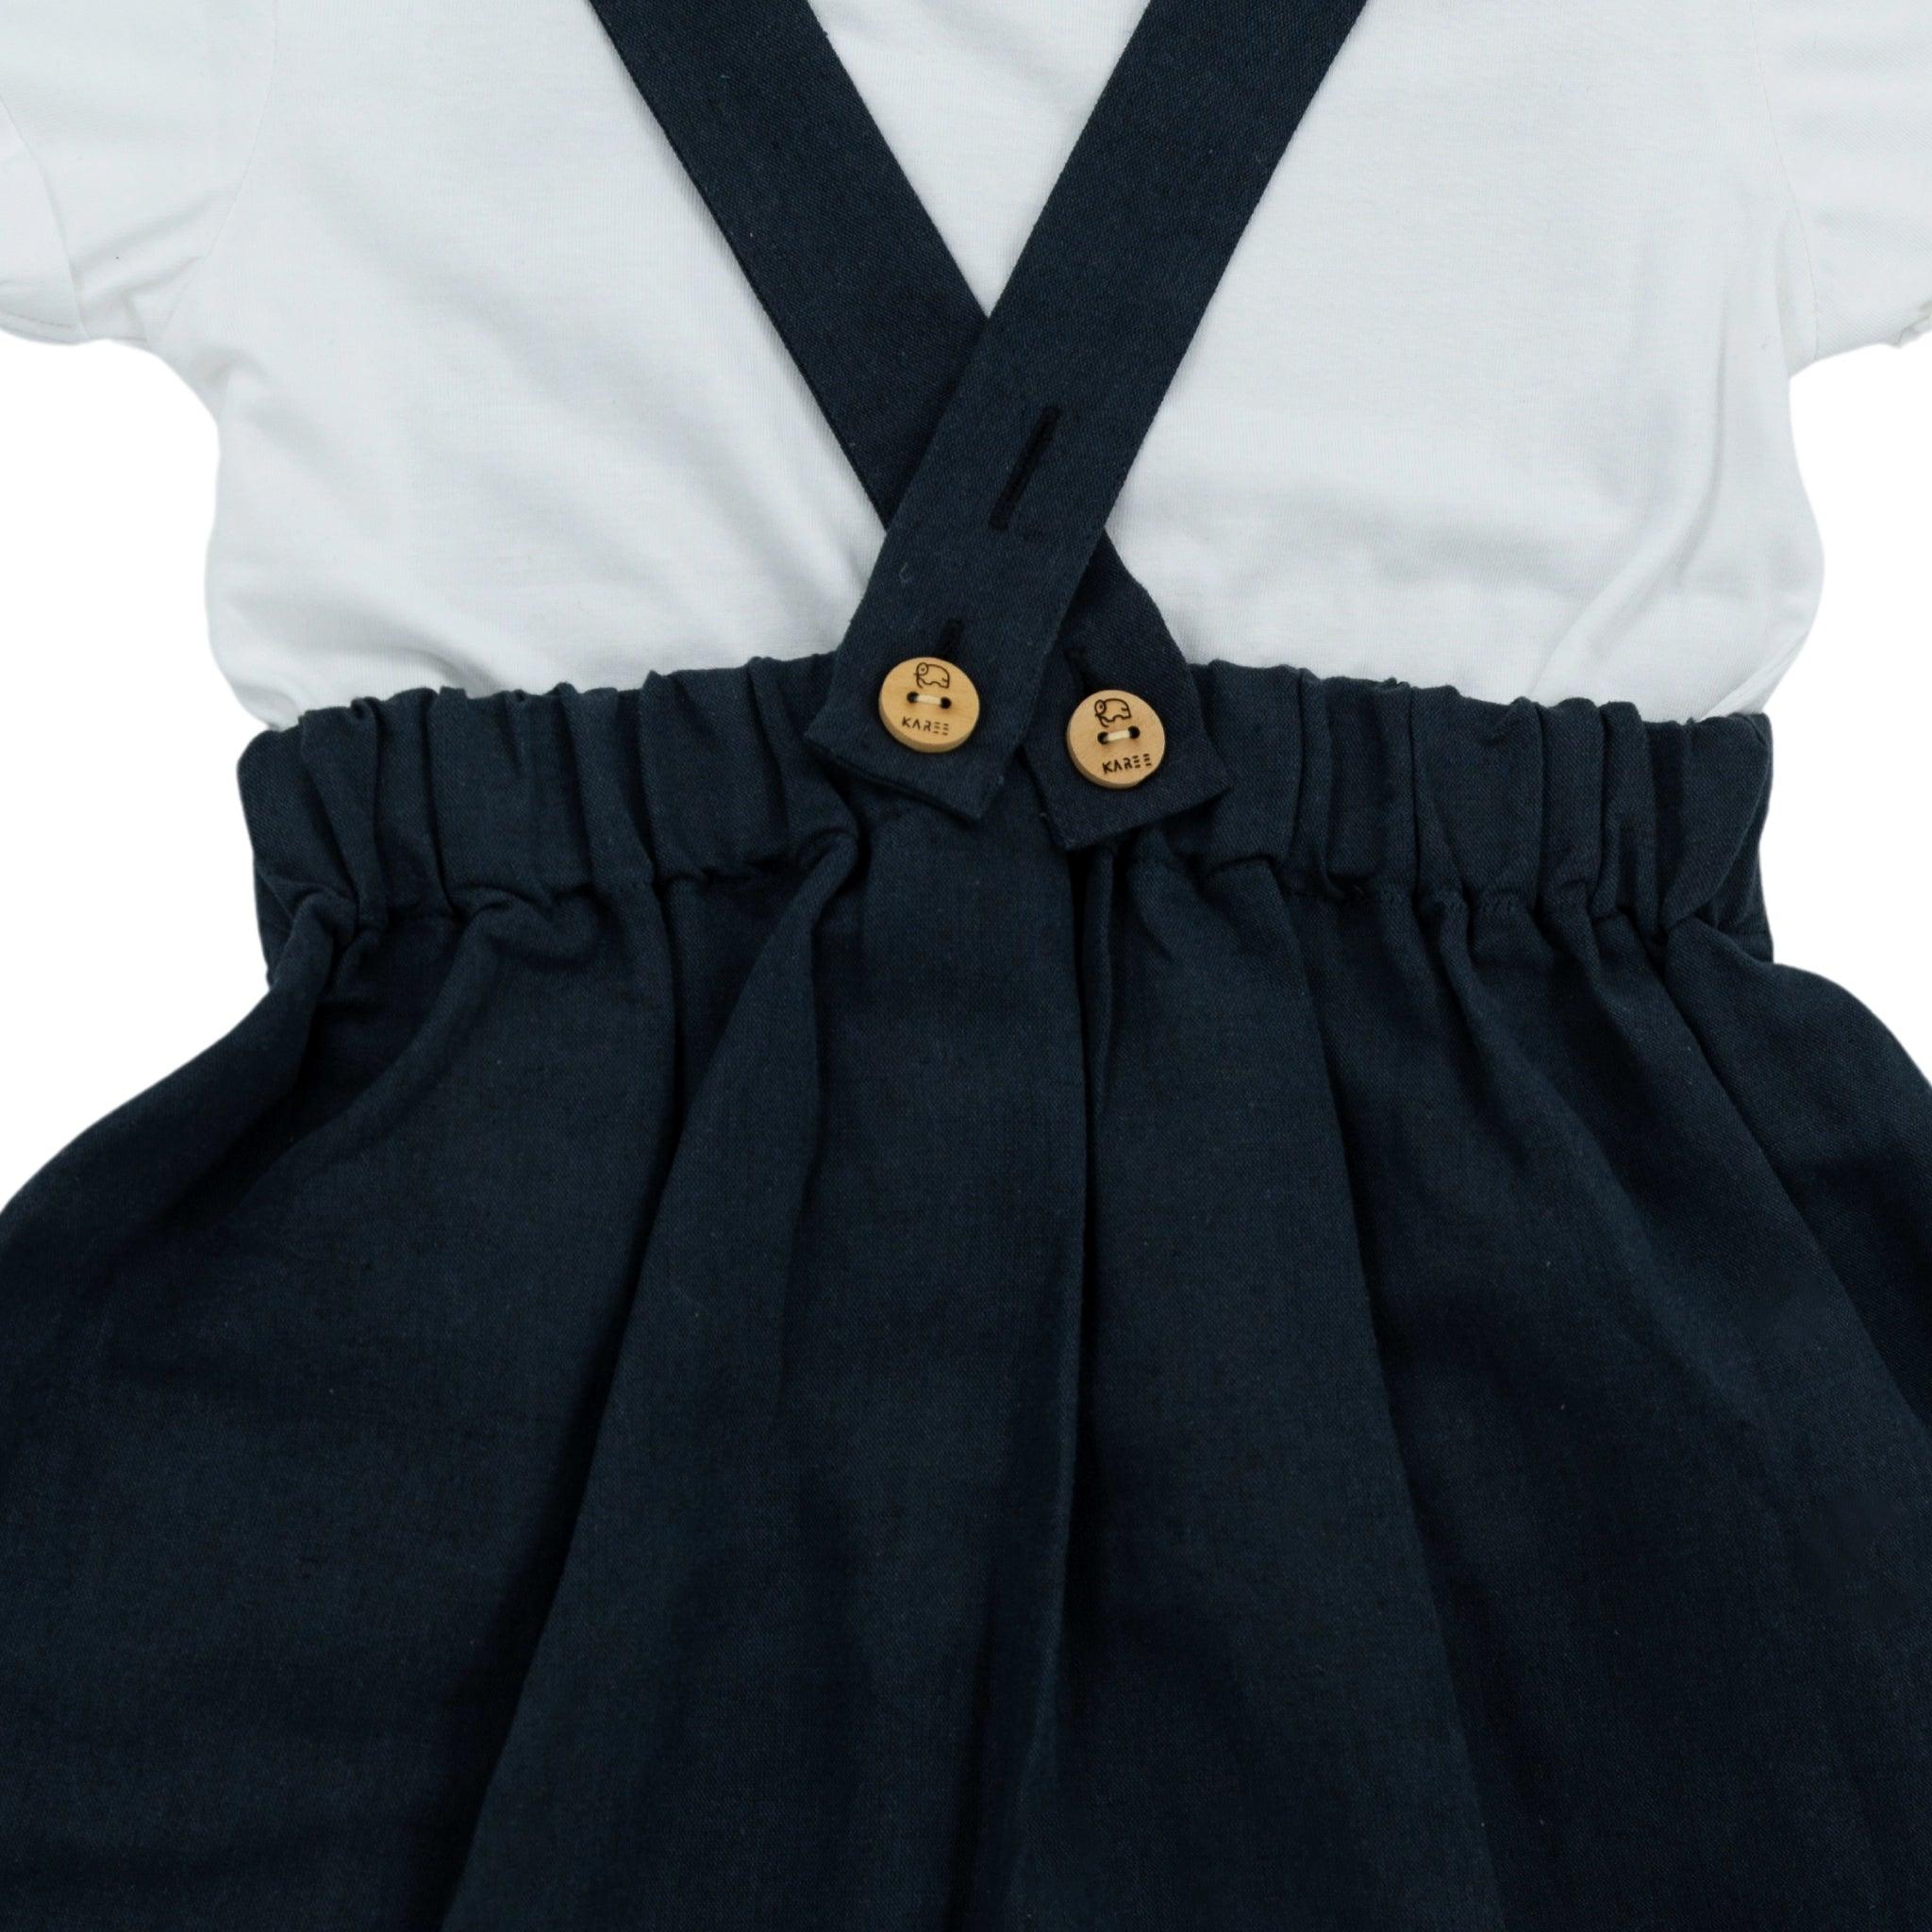 Close-up of a child's Karee Ebony Black Linen Pinafore for Girls attached to a gathered waist skirt, featuring wooden buttons, against a white shirt background.